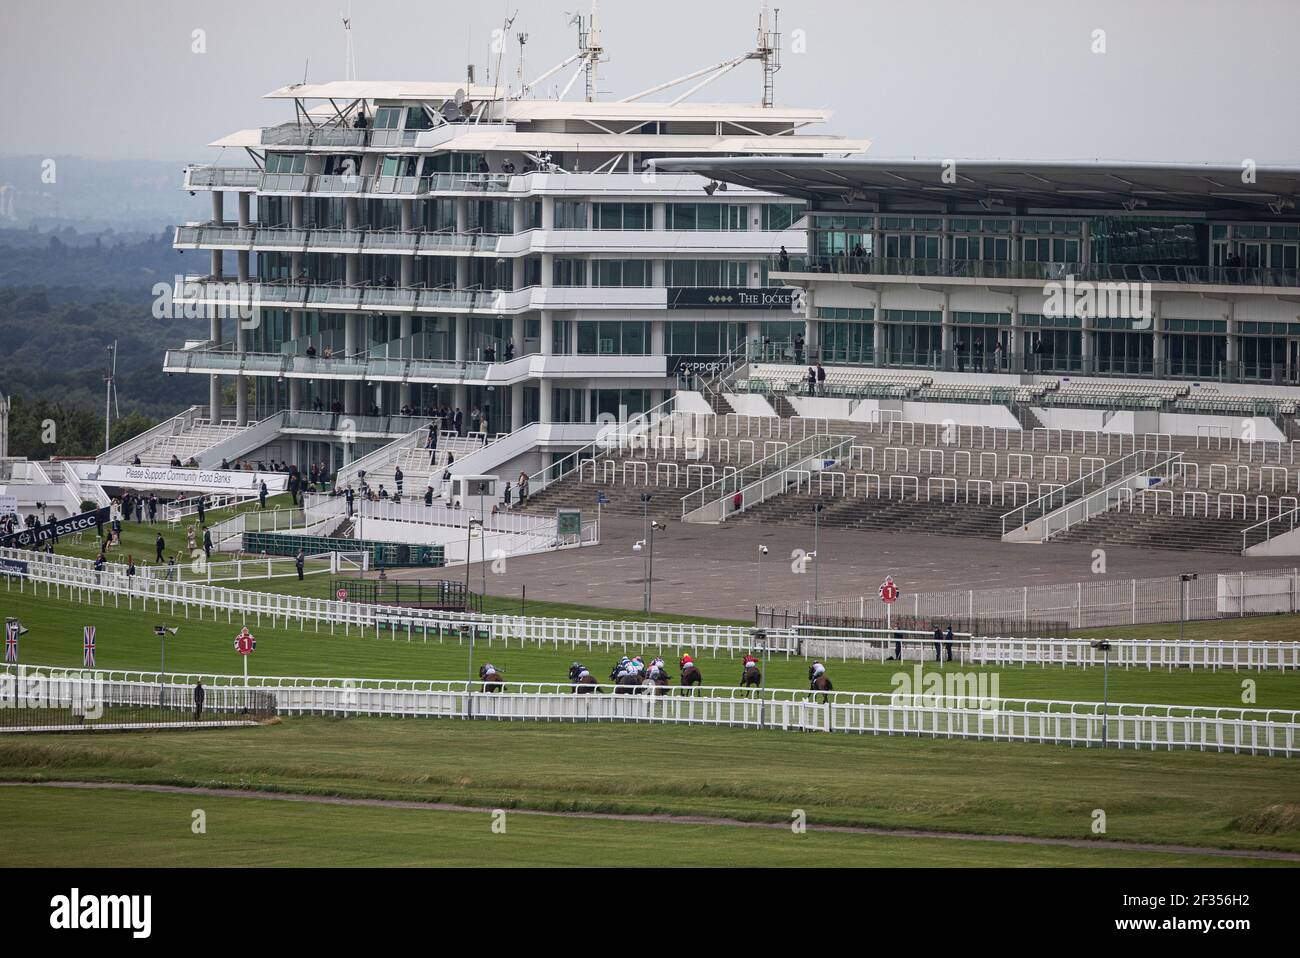 General view of the empty grandstand during the Investec Handicap race at Epsom Racecourse Stock Photo